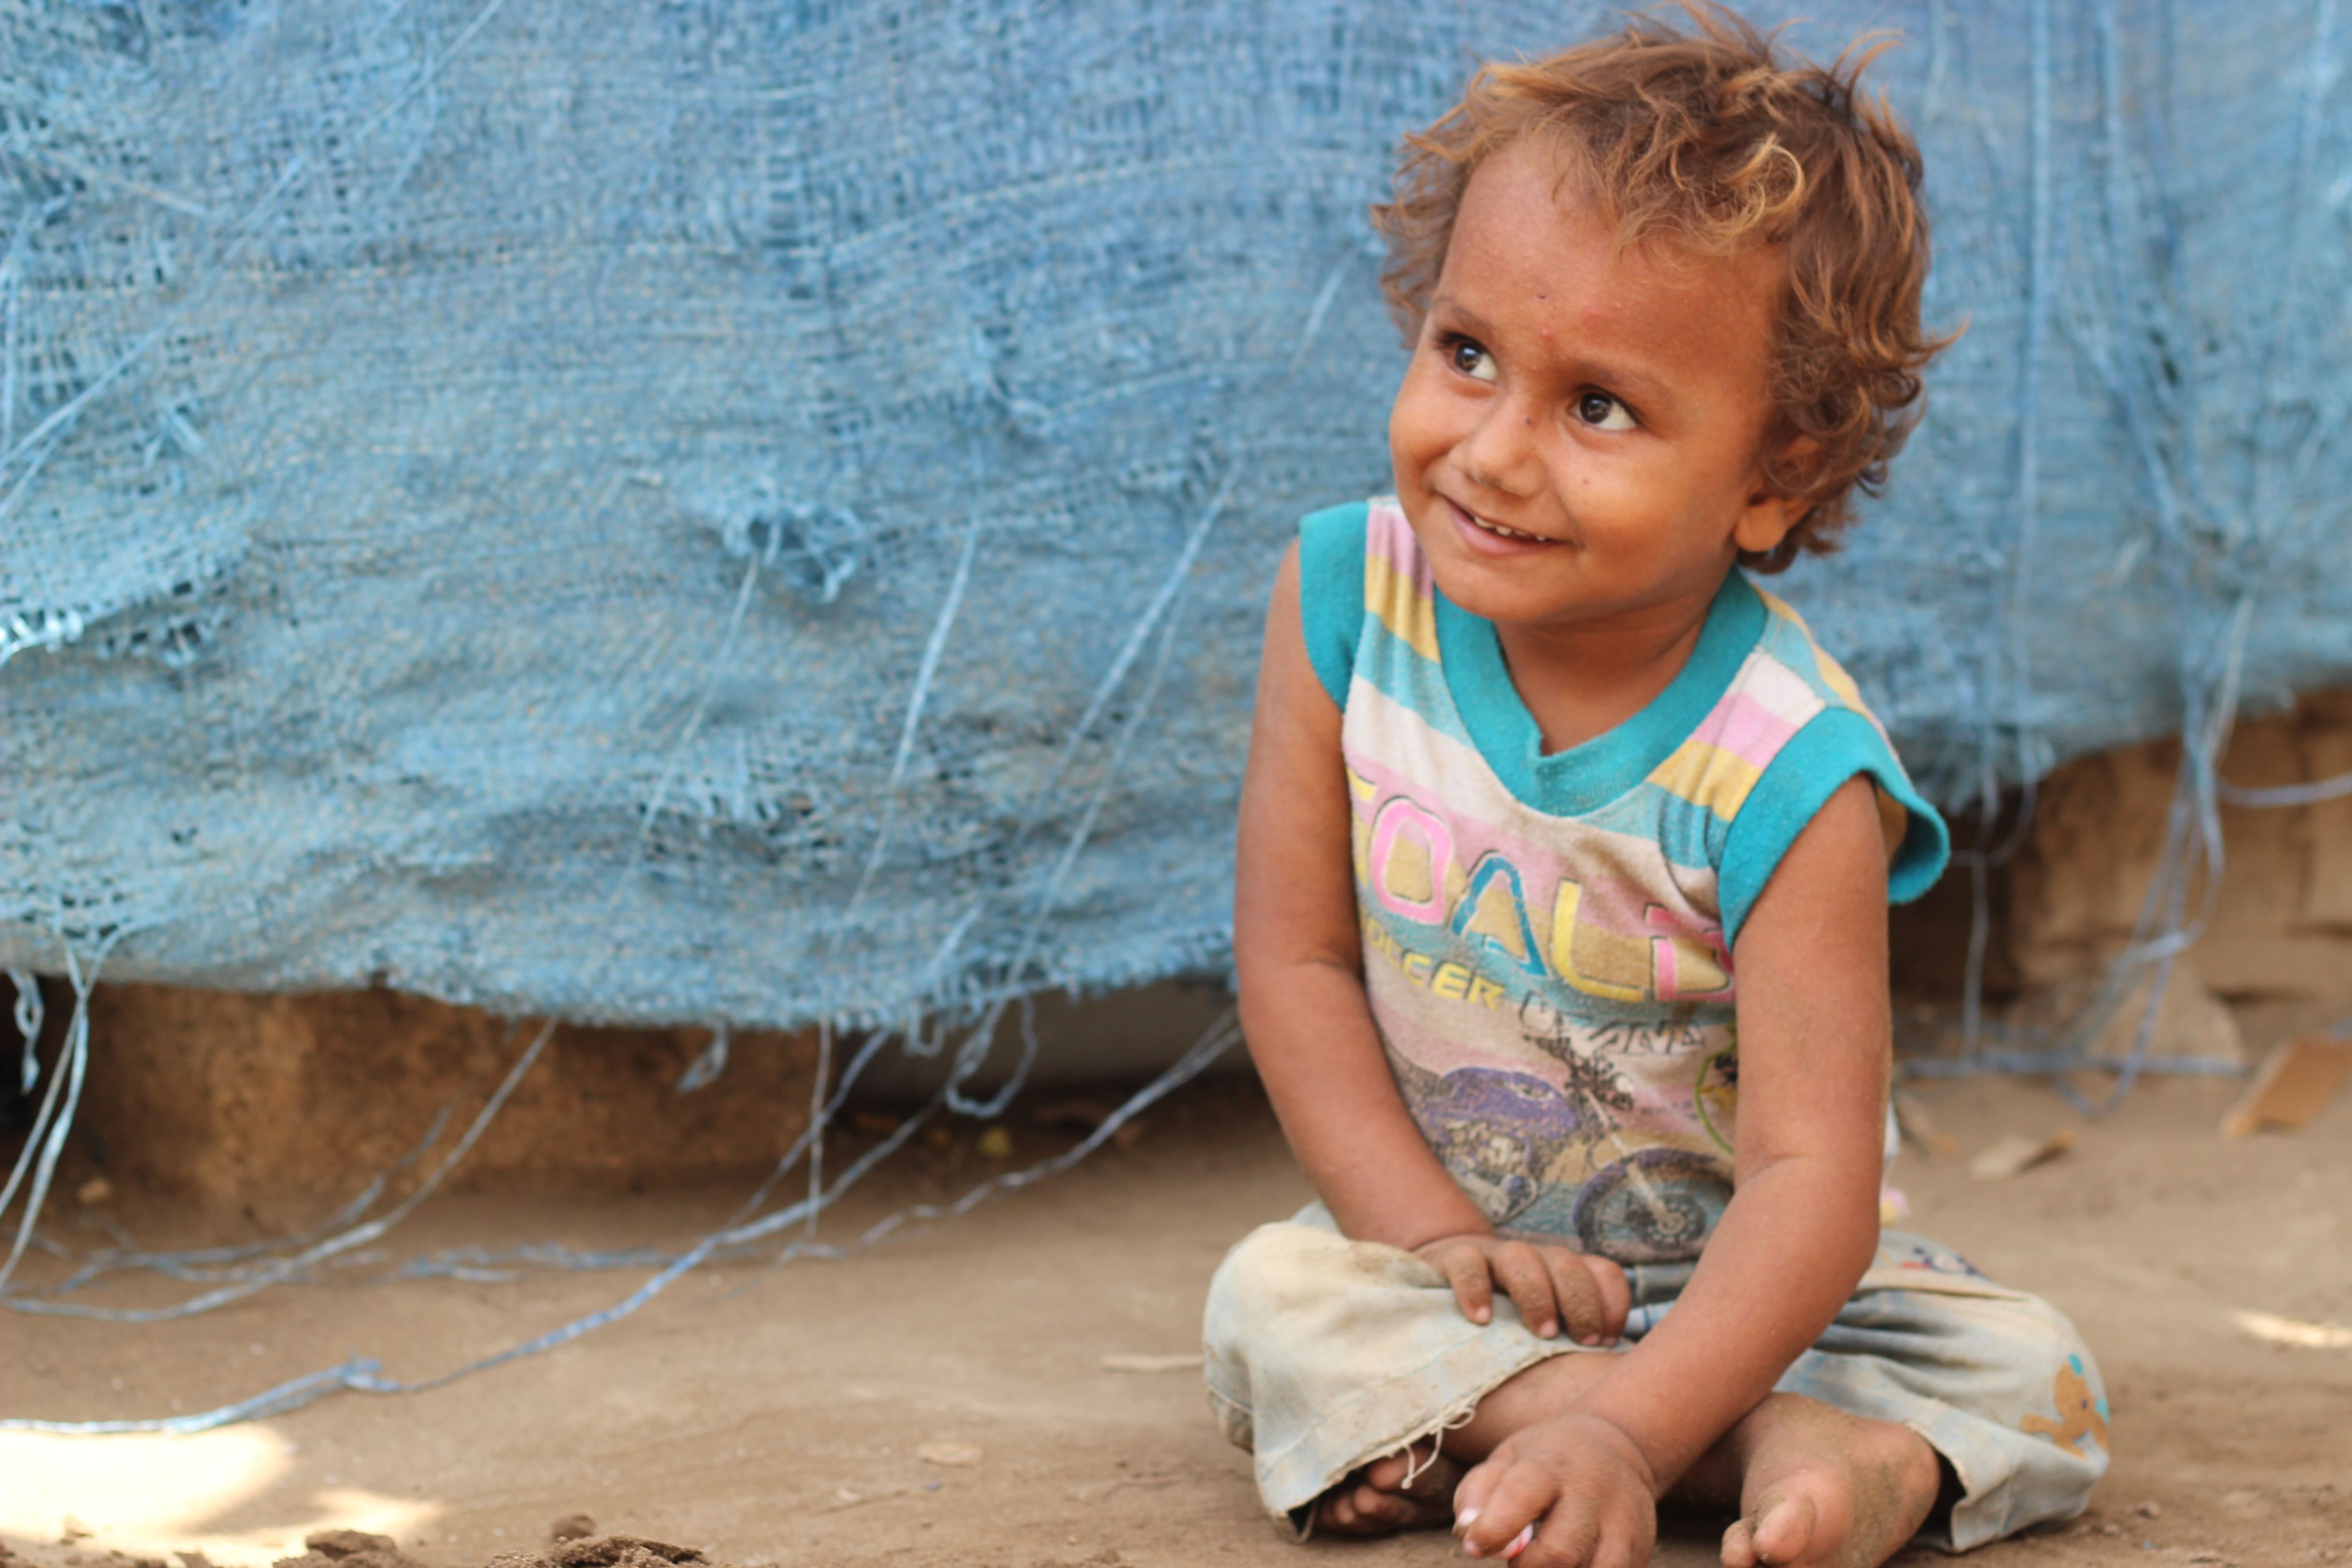 Nusair* was treated by Save the Children in Yemen where he was suffering from malnutrition